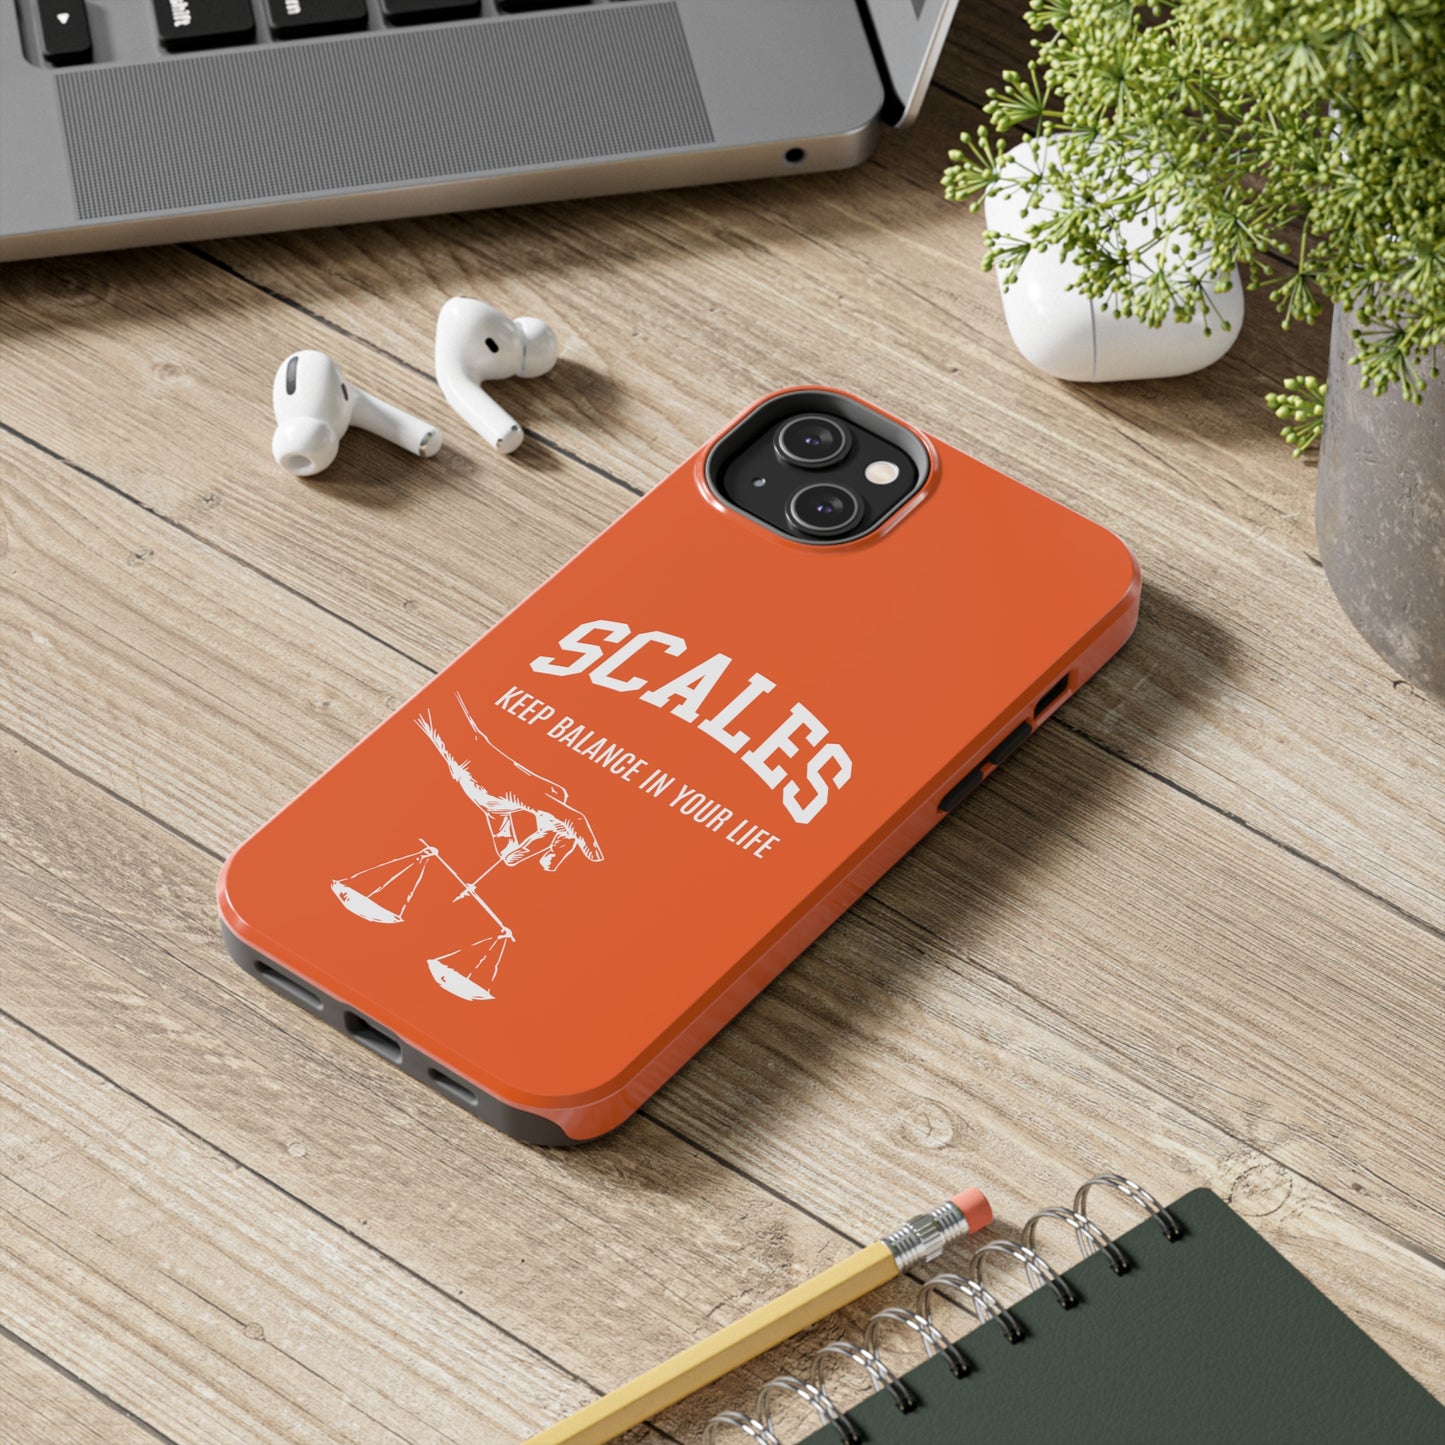 Scales Tough Phone Cases